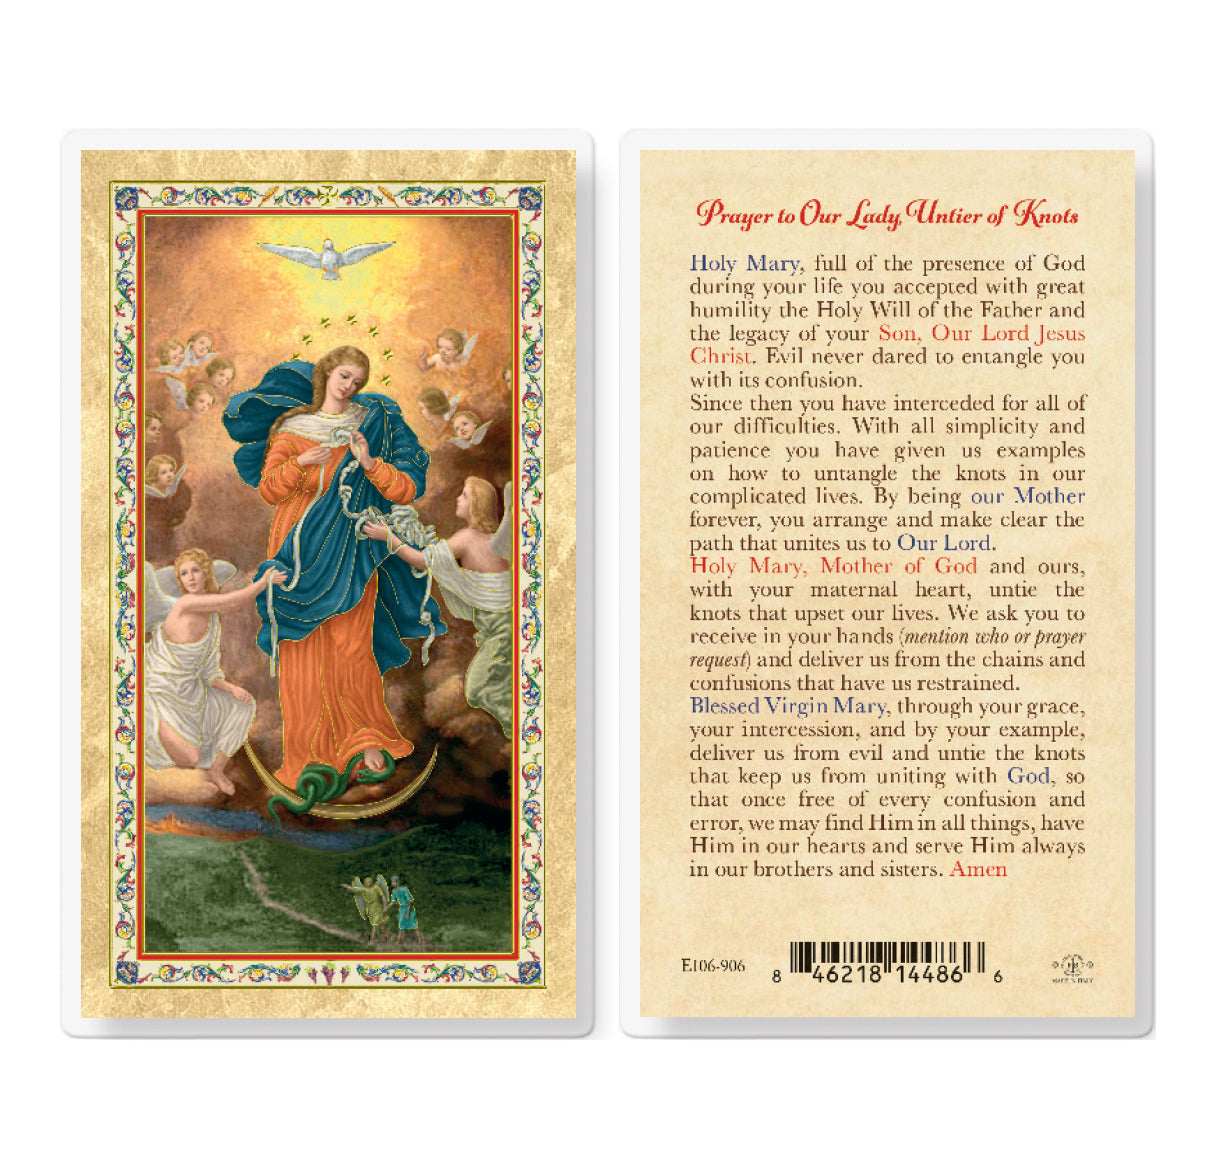 Our Lady, Untier of Knots Gold-Stamped Laminated Catholic Prayer Holy Card with Prayer on Back, Pack of 25